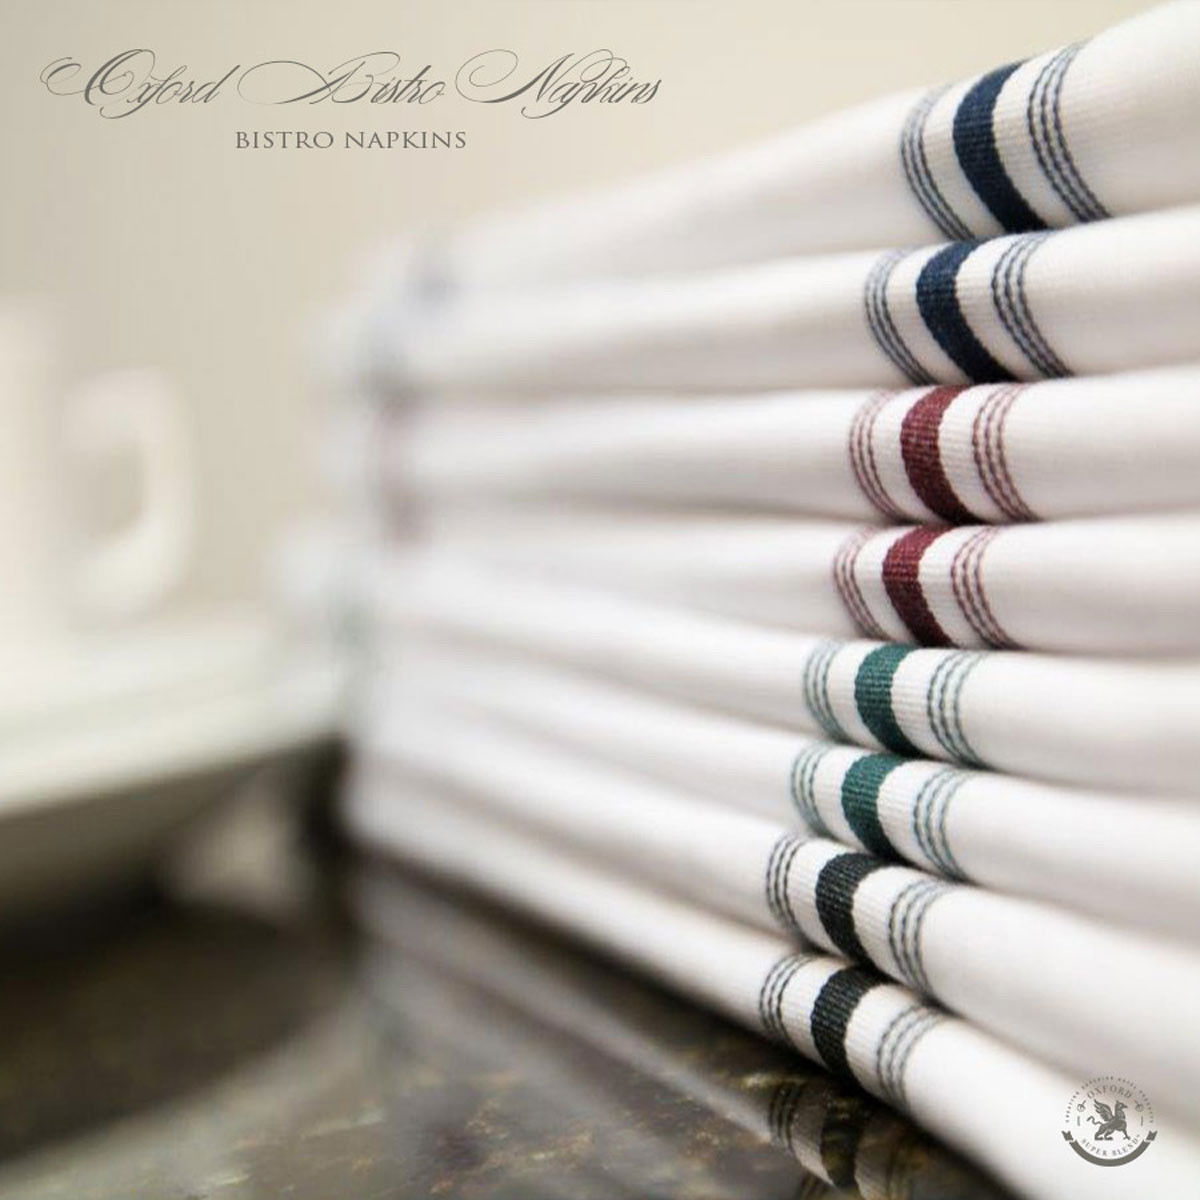 Is the fabric used for these linen napkins bulk wholesale?